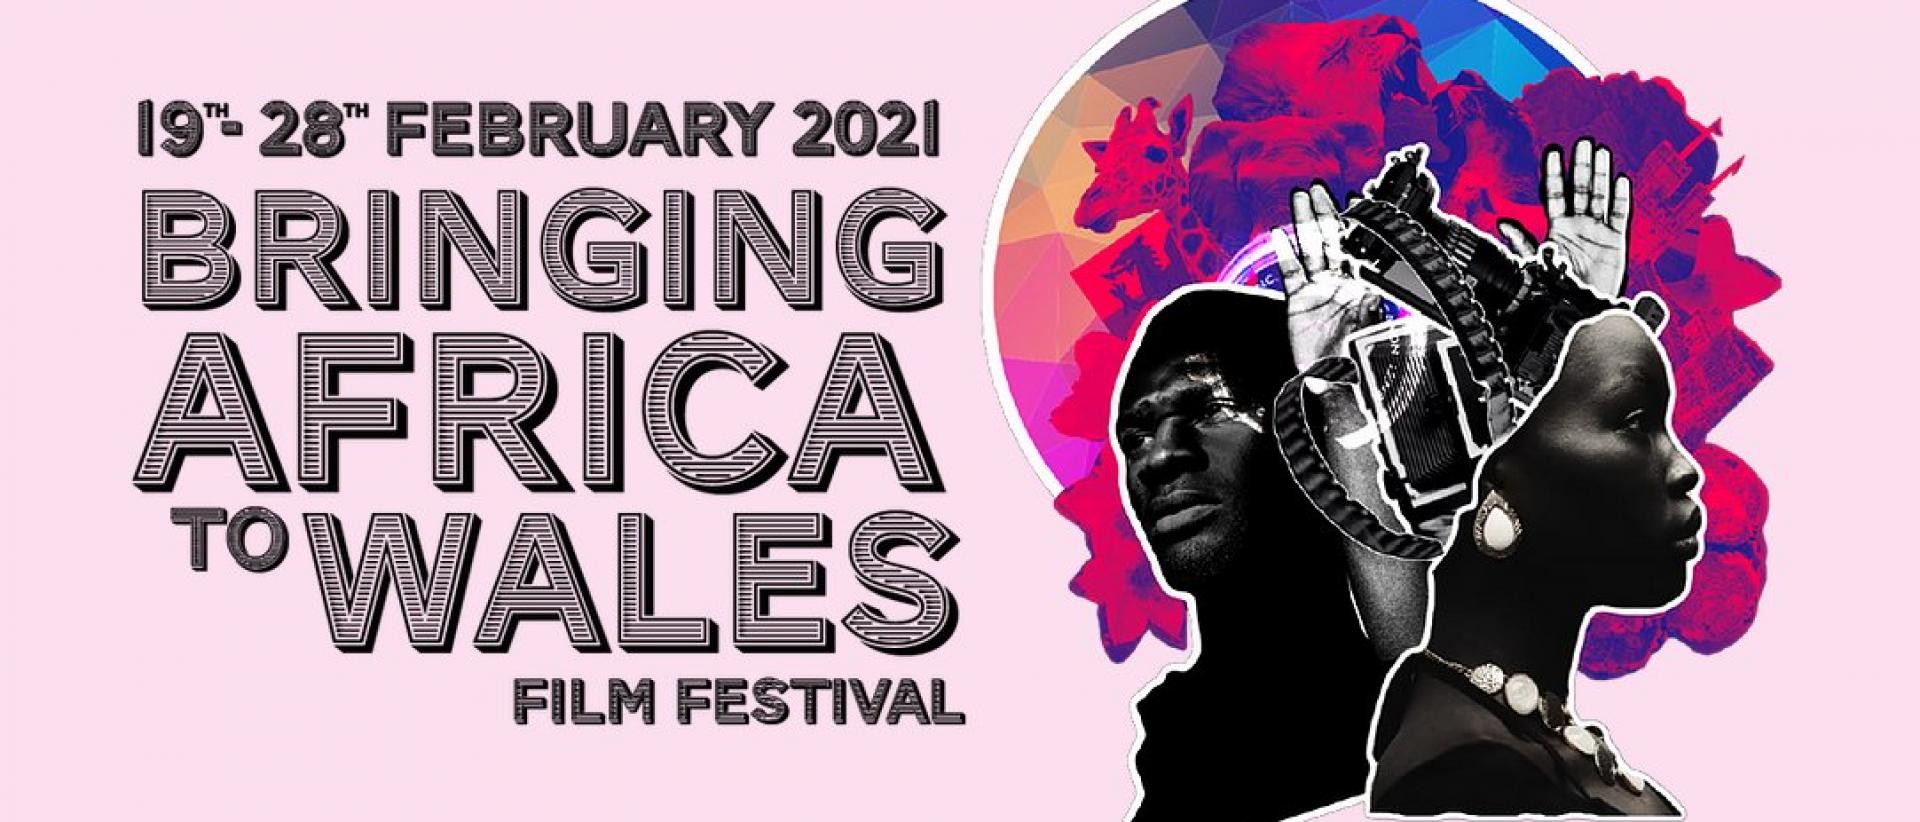 poster for the bringing africa to wales festival